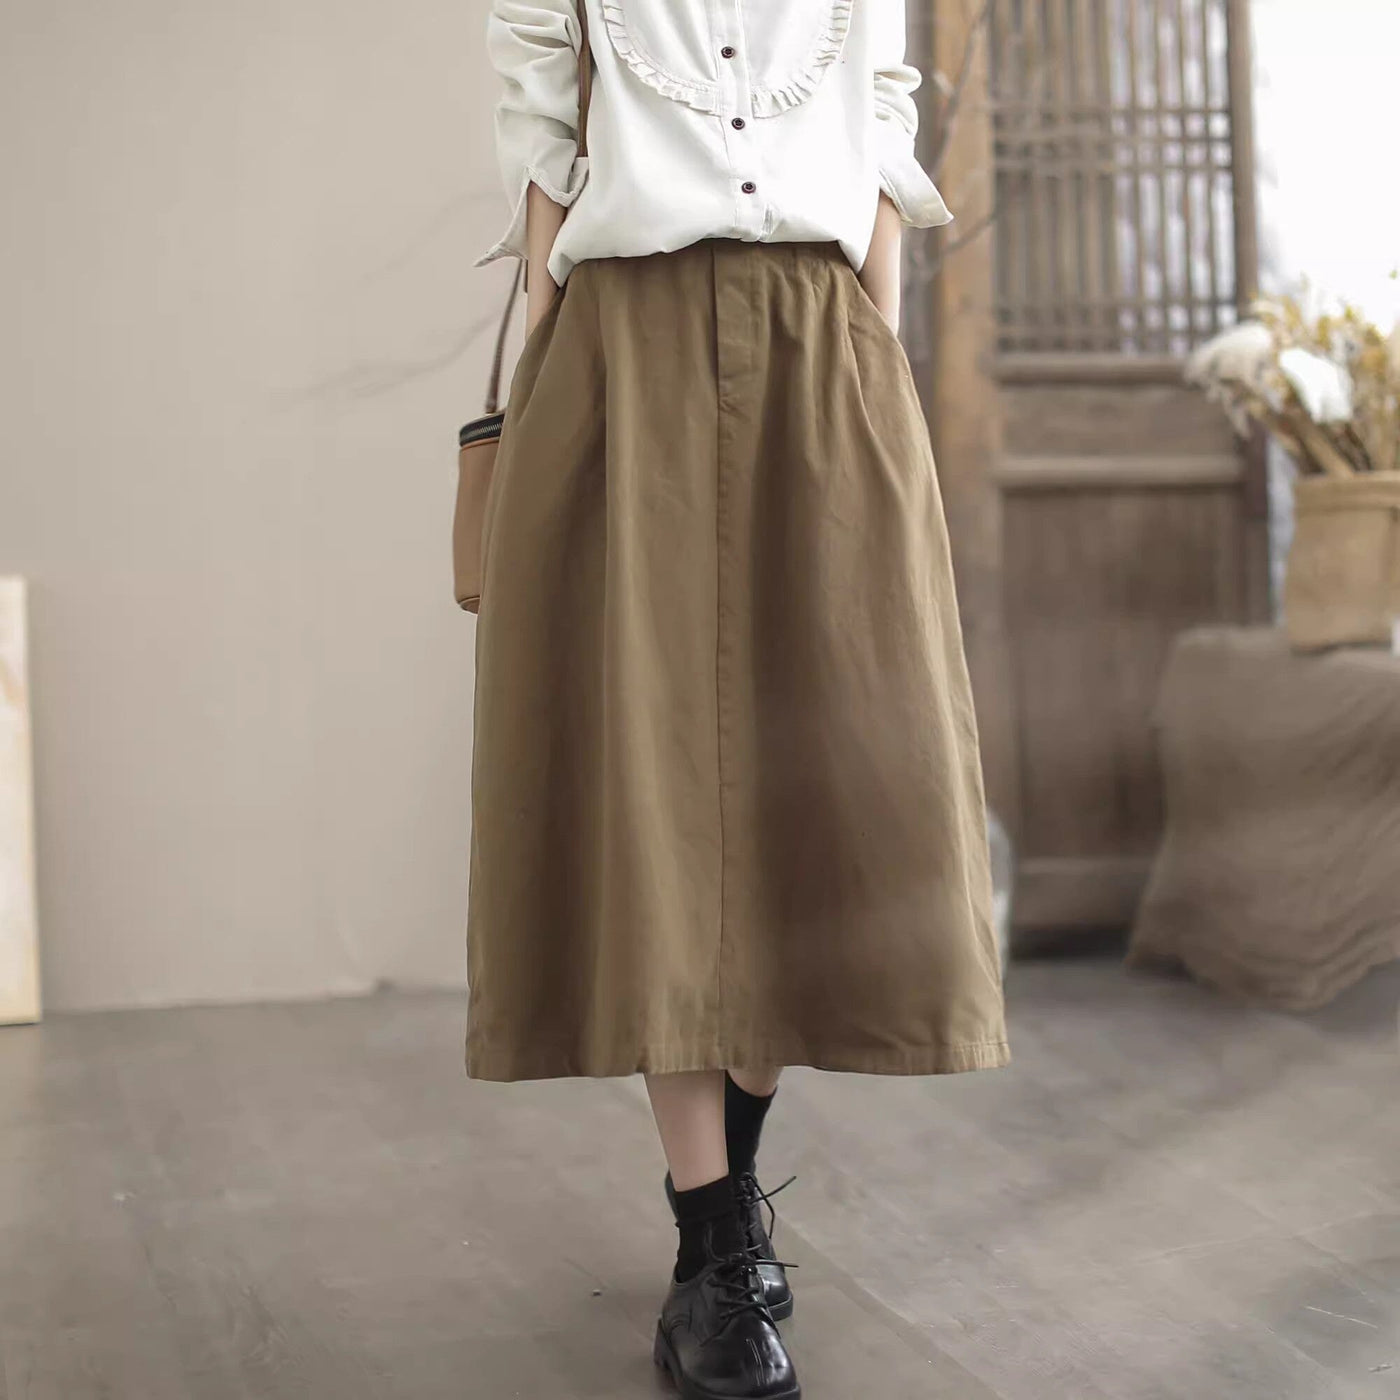 Spring Minimalist Casual Cotton A-Line Skirt